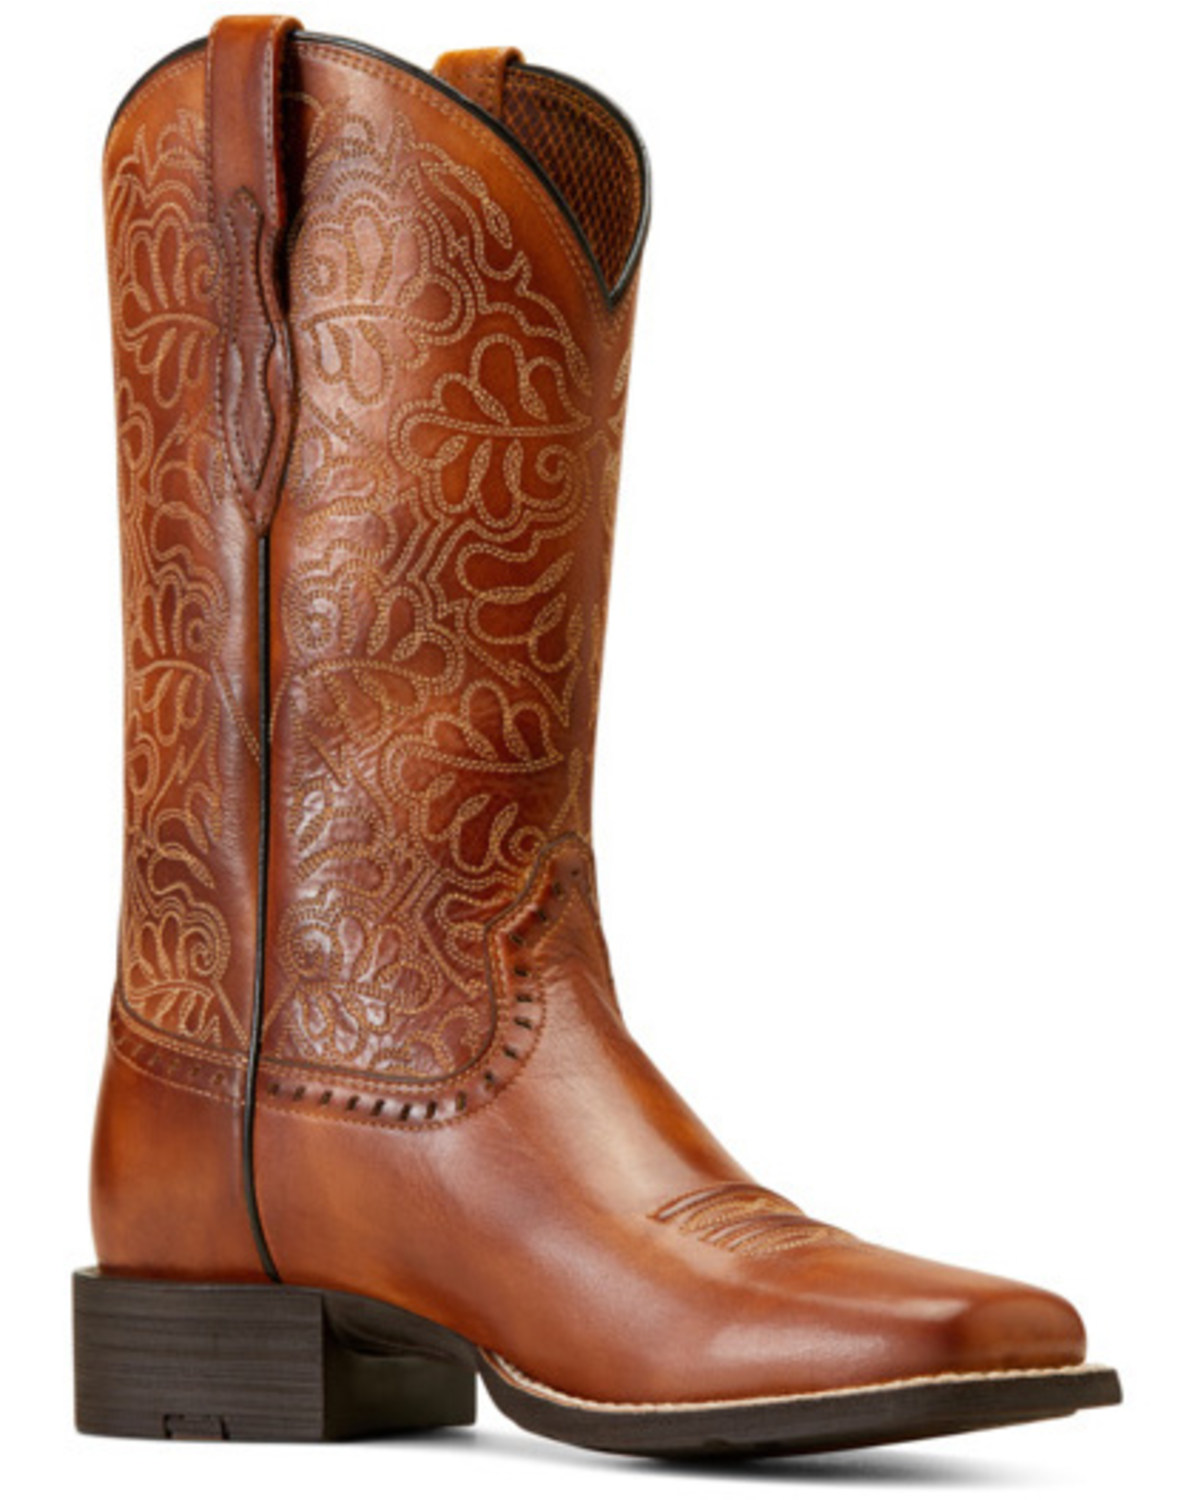 Ariat Women's Round Up Remuda Performance Western Boots - Broad Square Toe